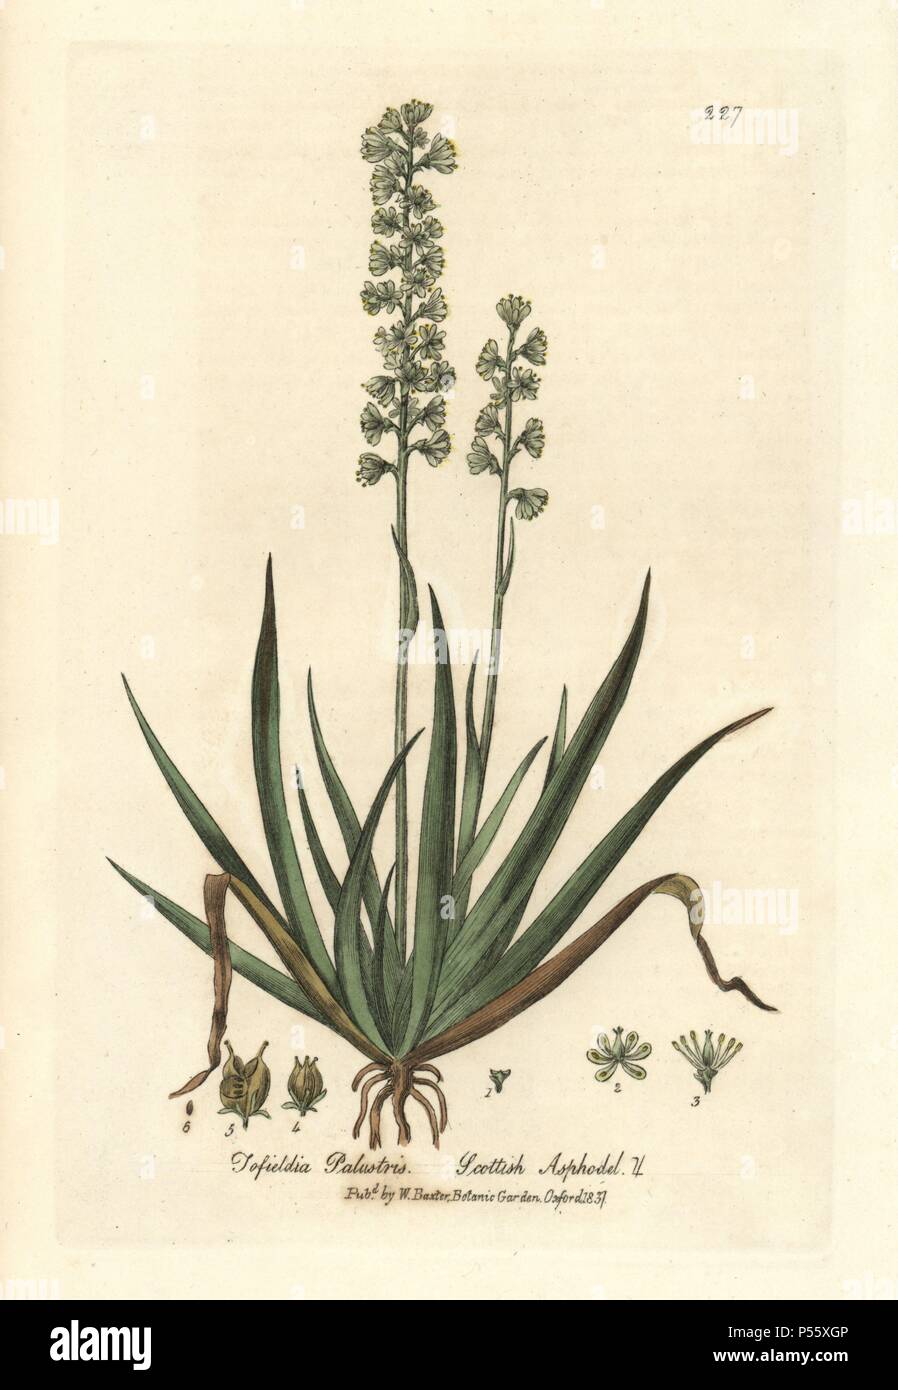 Scottish asphodel, Tofieldia palustris. Handcoloured copperplate engraving from William Baxter's 'British Phaenogamous Botany' 1837. Scotsman William Baxter (1788-1871) was the curator of the Oxford Botanic Garden from 1813 to 1854. Stock Photo